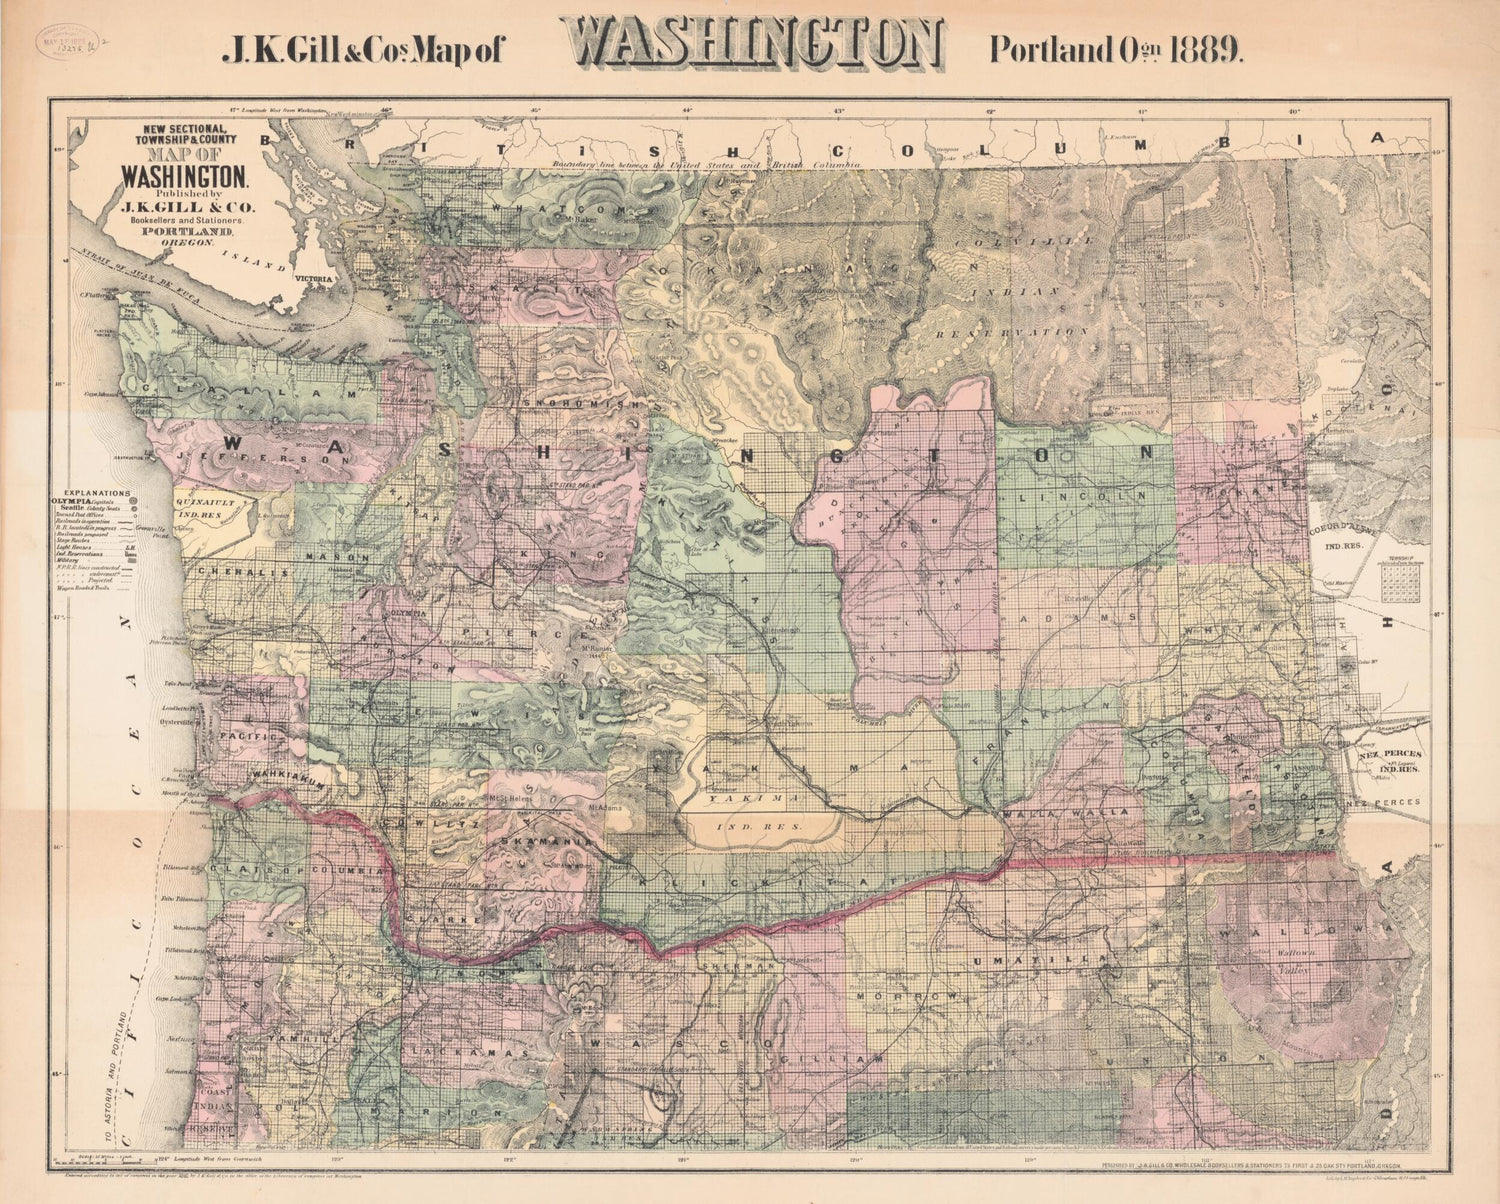 This old map of New Sectional, Township &amp; County Map of Washington (New Sectional, Township and County Map of Washington, J.K. Gill &amp; Cos. Map of Washington) from 1889 was created by W. H. (William Henry) Galvani,  J.K. Gill &amp; Co in 1889